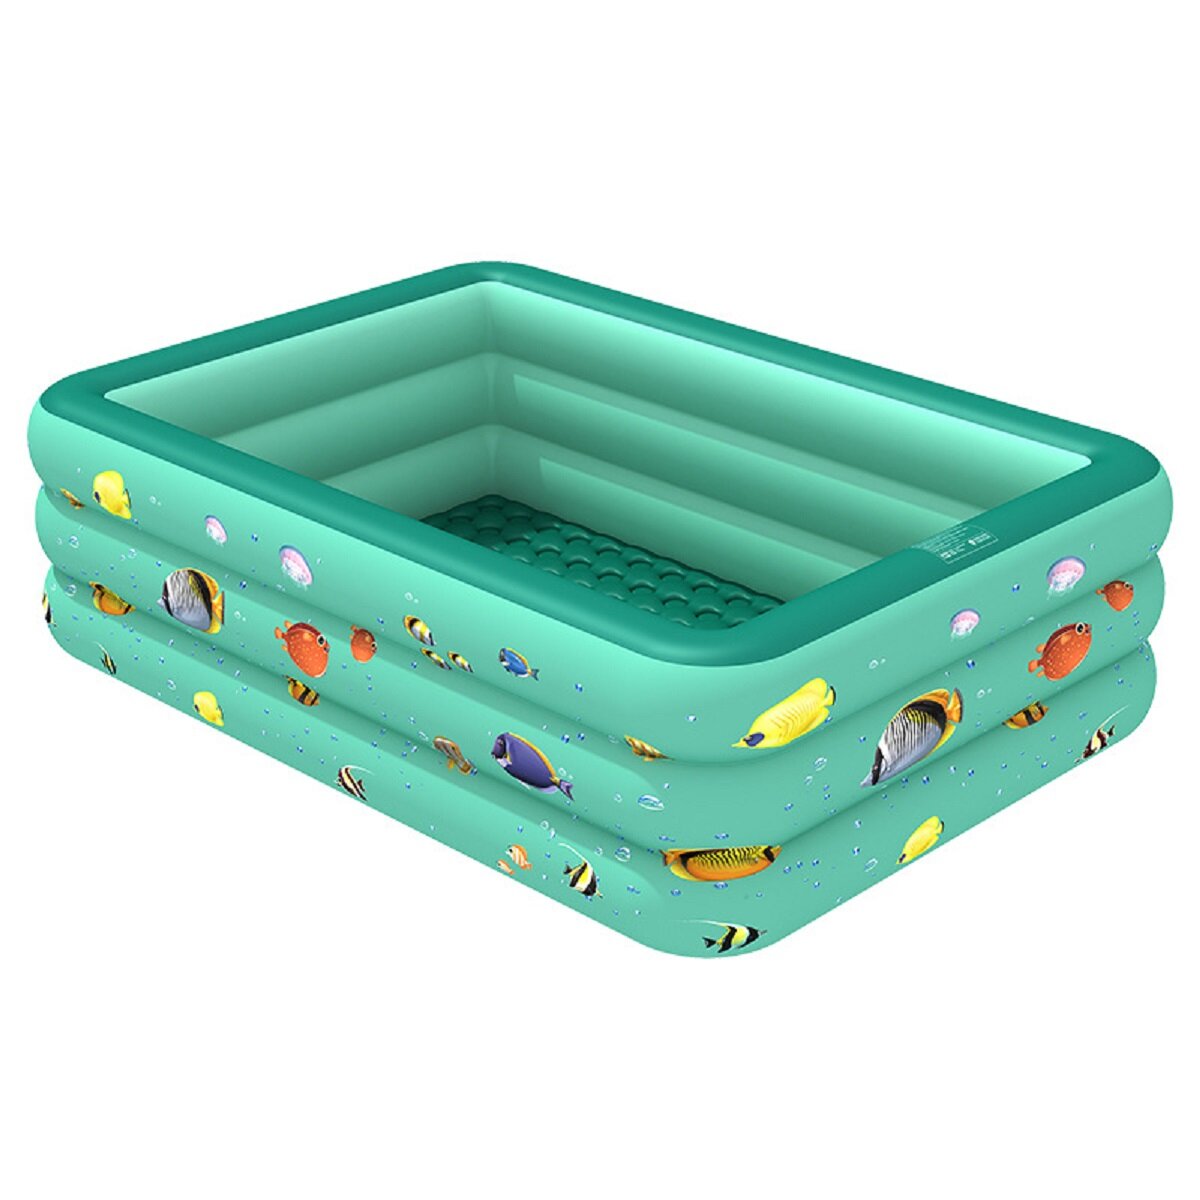 Image of Inflatable Swimming Pool PVC Family Bathing Tub Paddling Pool Summer Outdoor Garden